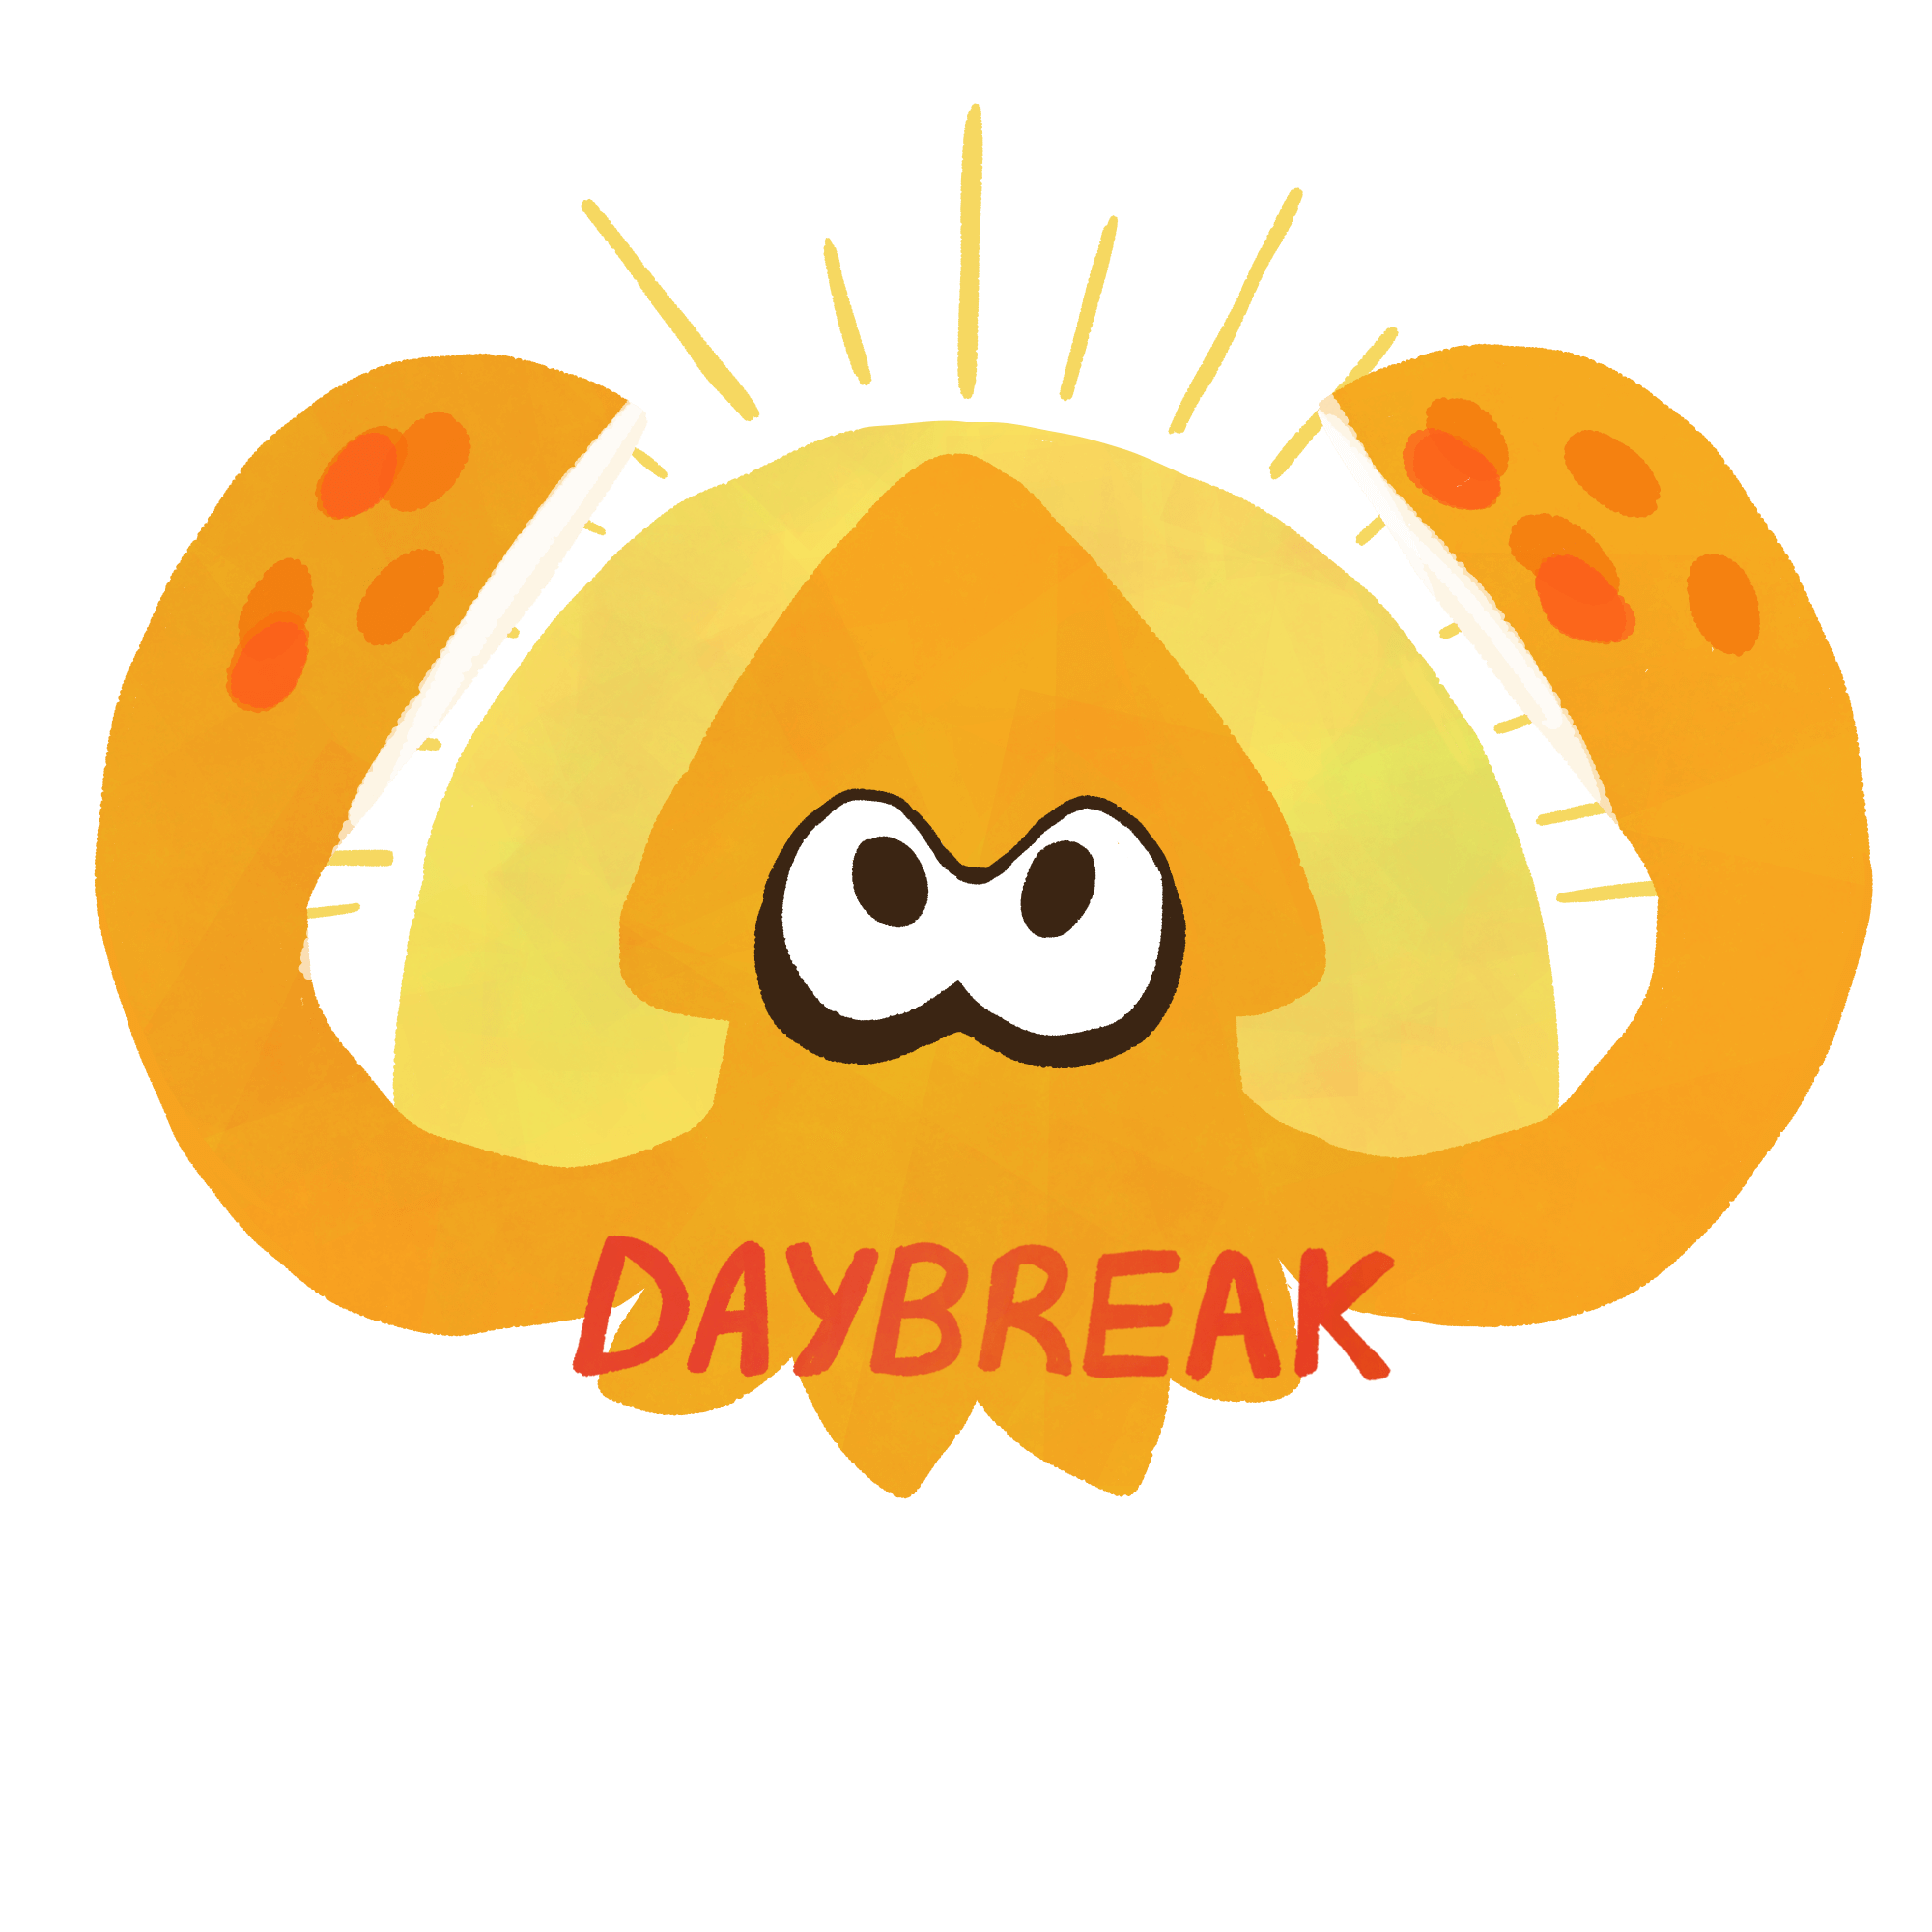 Graphic for LG daybreak logo, featuring a yellow-orange squid with its tentacles outstretched encompassing a sun. Red-orange 'daybreak' text overlays the bottom of the squid.